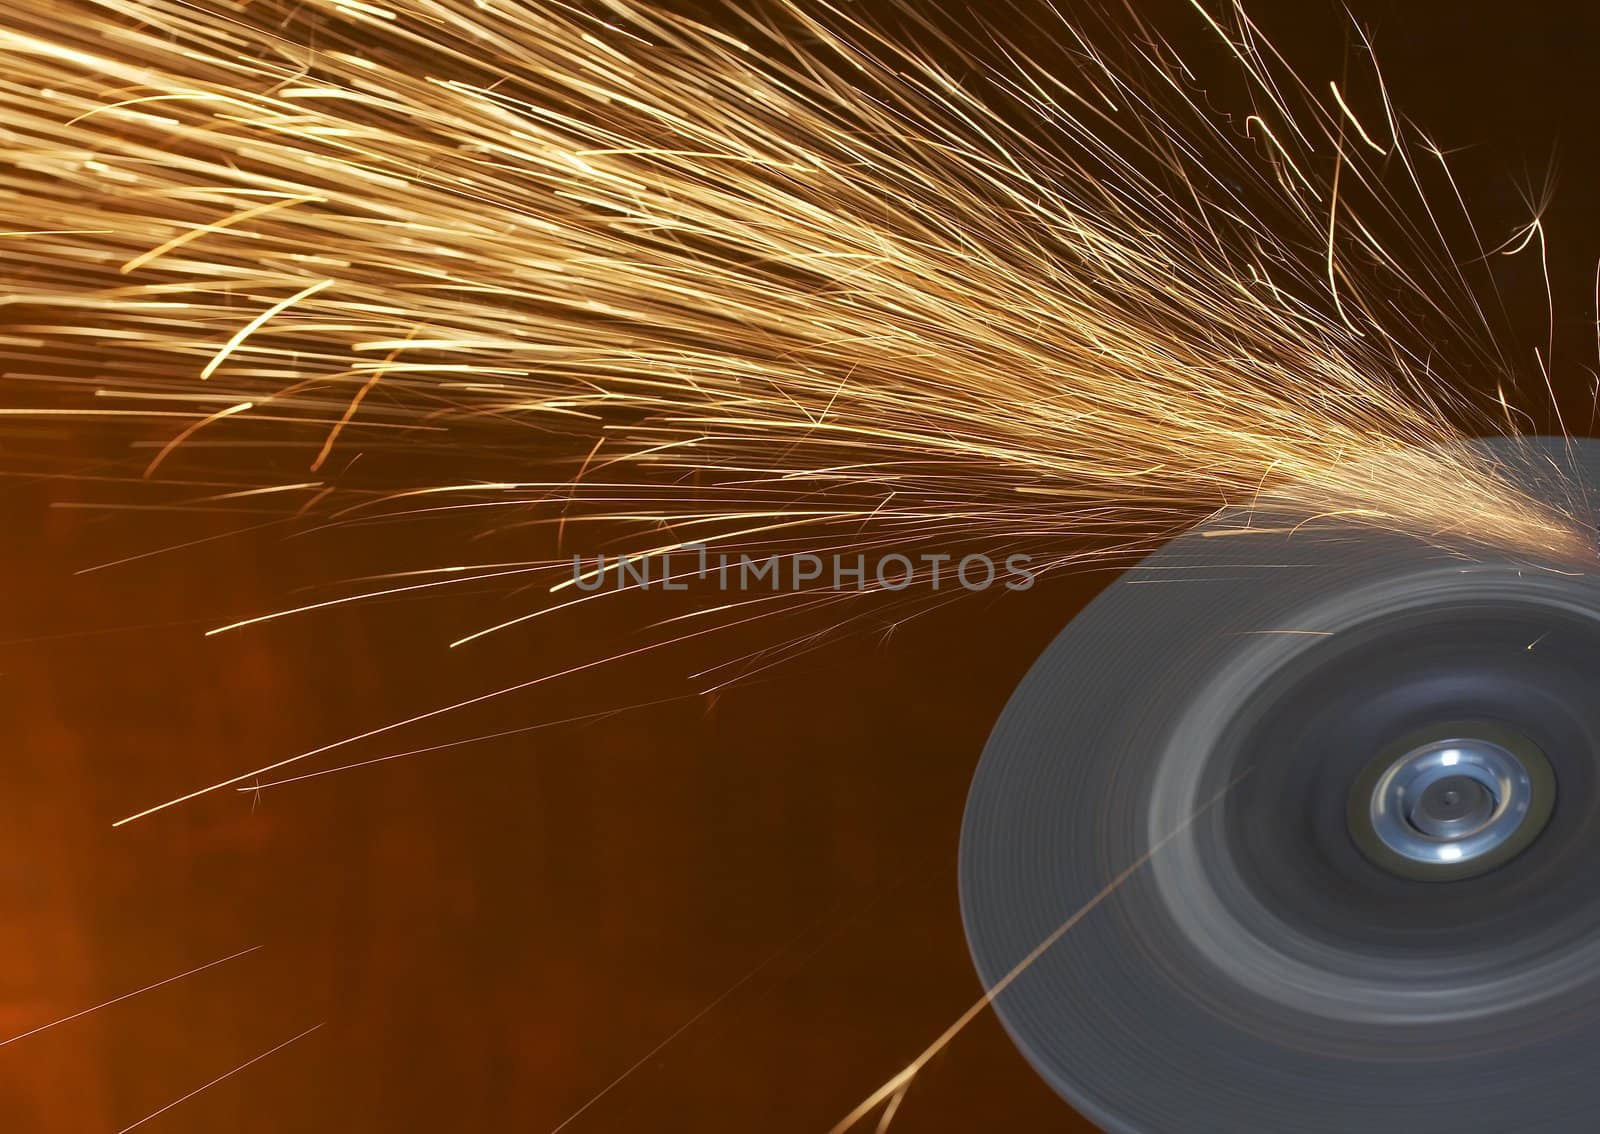 a close up picture of sparks on a grinding wheel